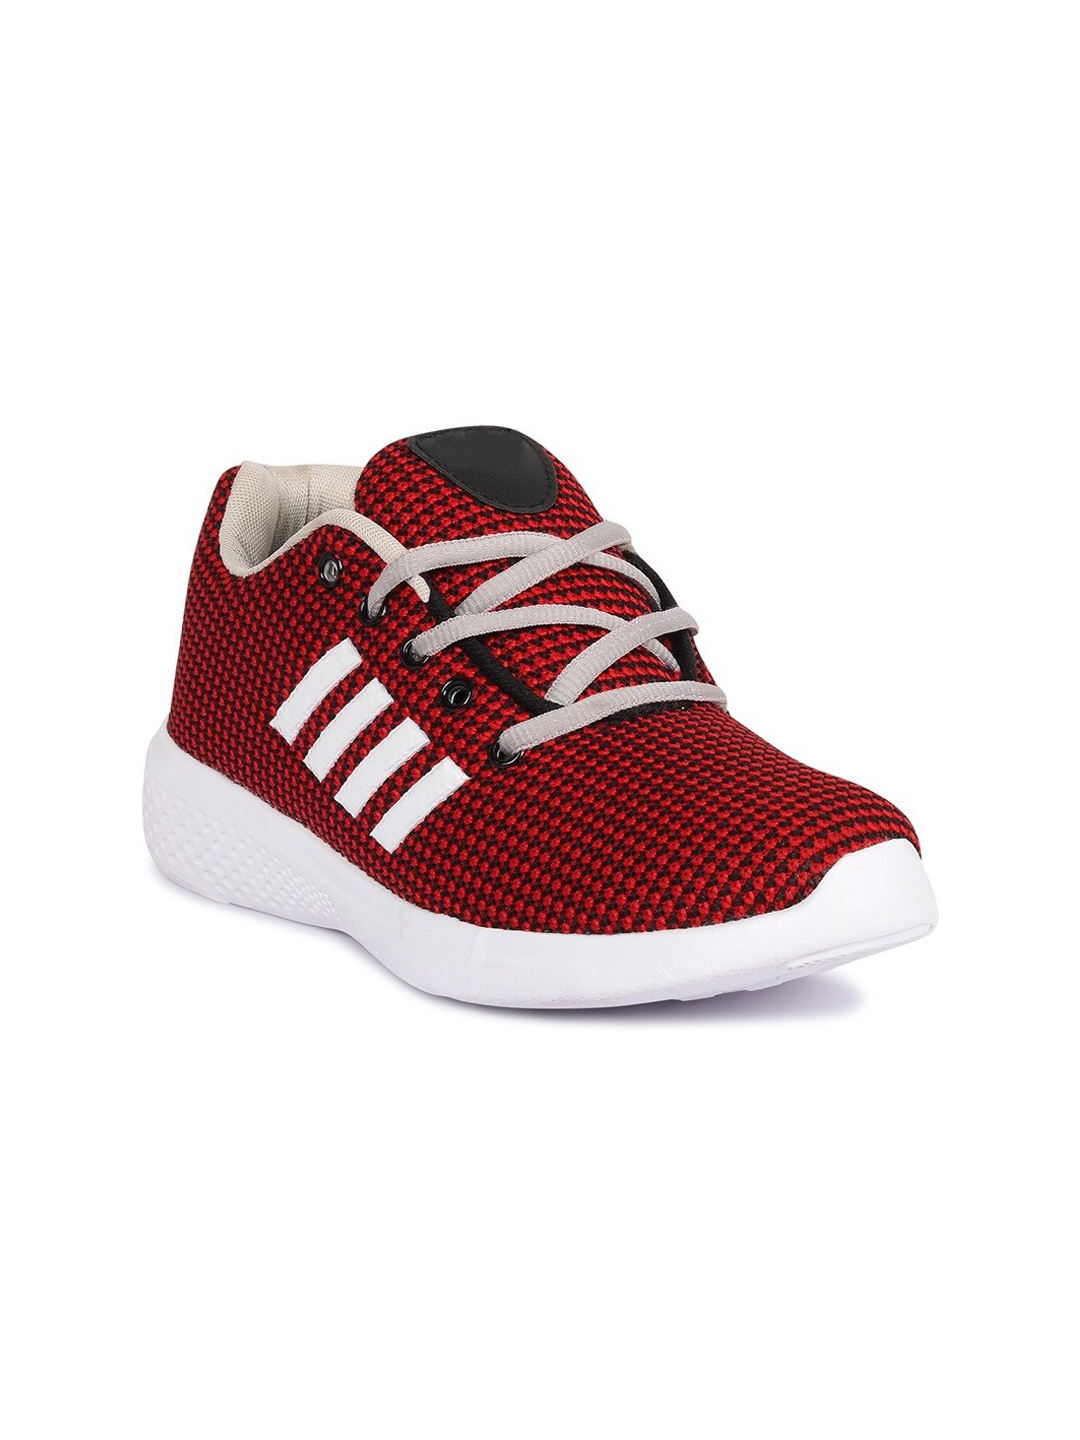 FAST TRAX Women Red Woven Design Sneakers